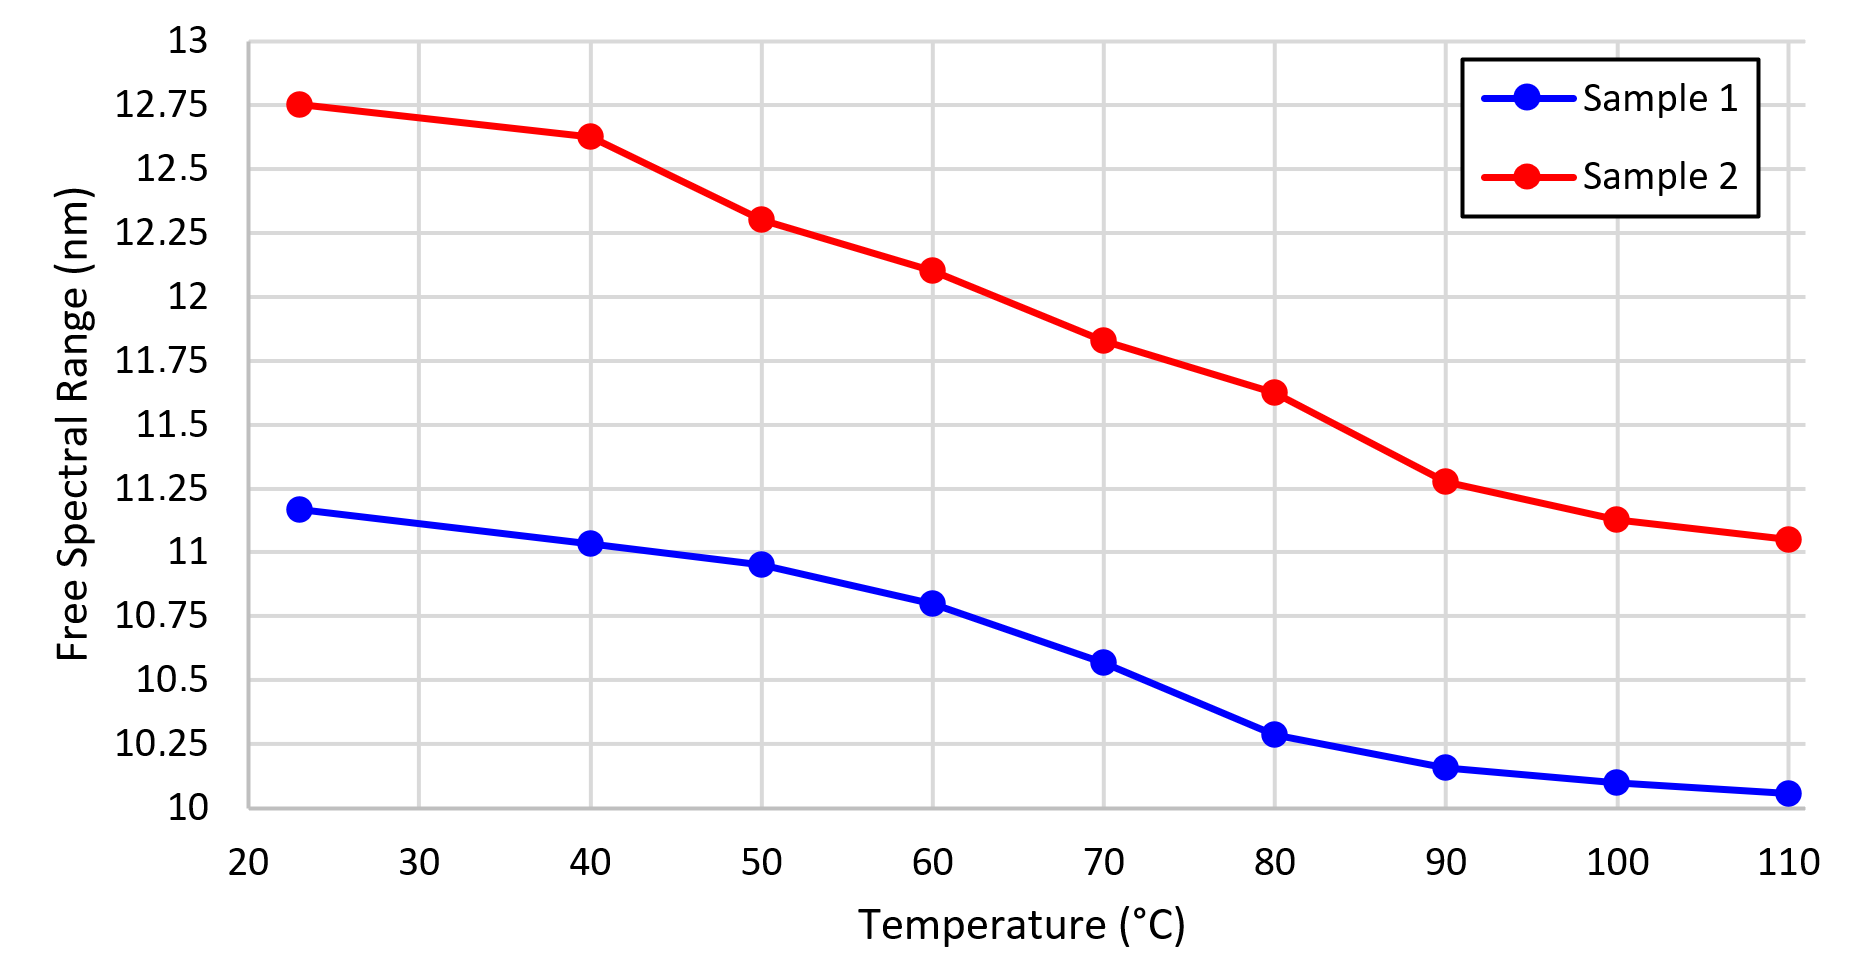 Dependencies of the free spectral range of Fabry-Perot interferometers on temperature